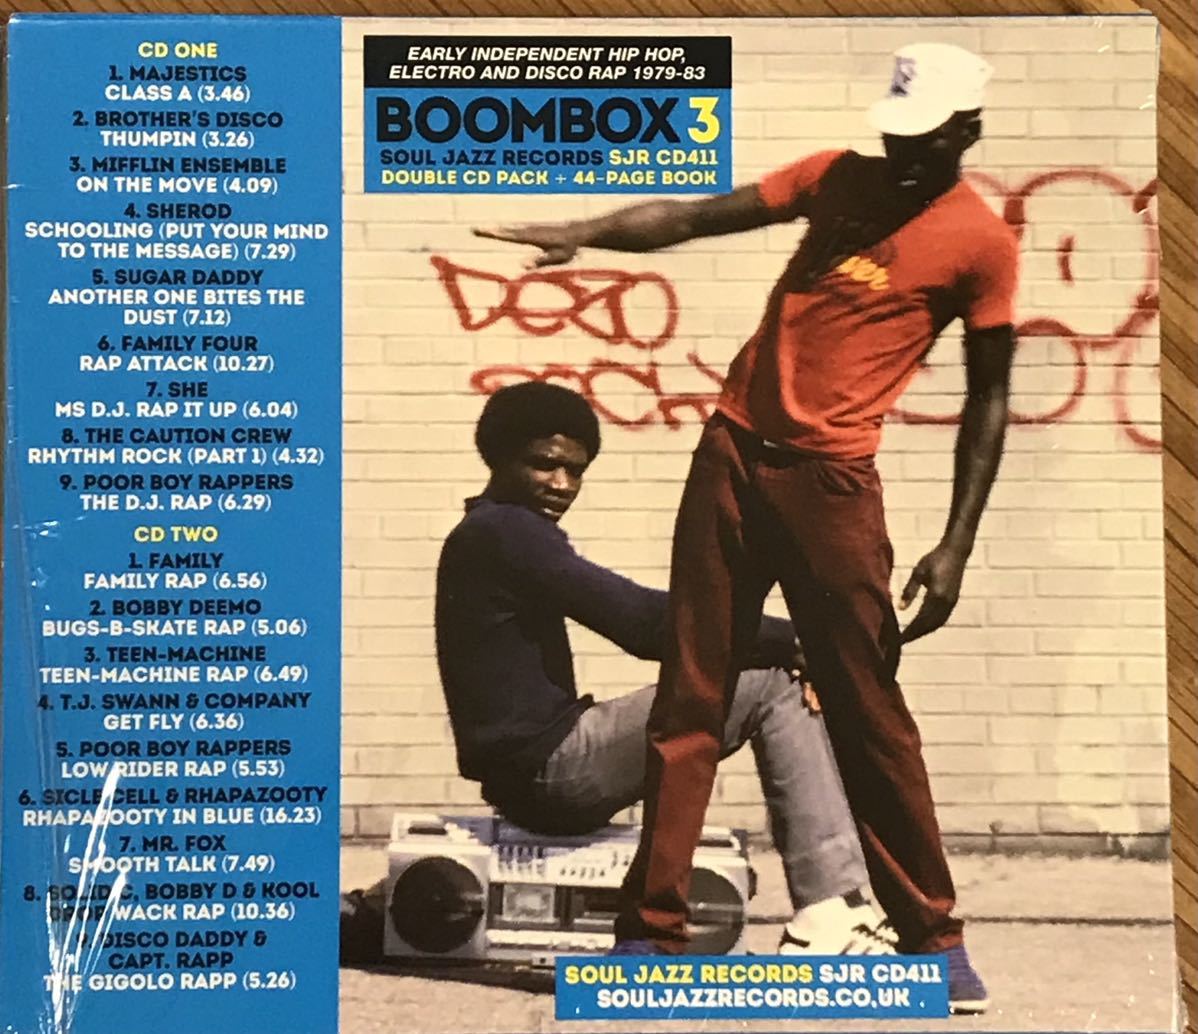 [2CD]Soul Jazz Records Presents Boombox 3: Early Independent Hip Hop, Electro & Disco Rap 1979-83